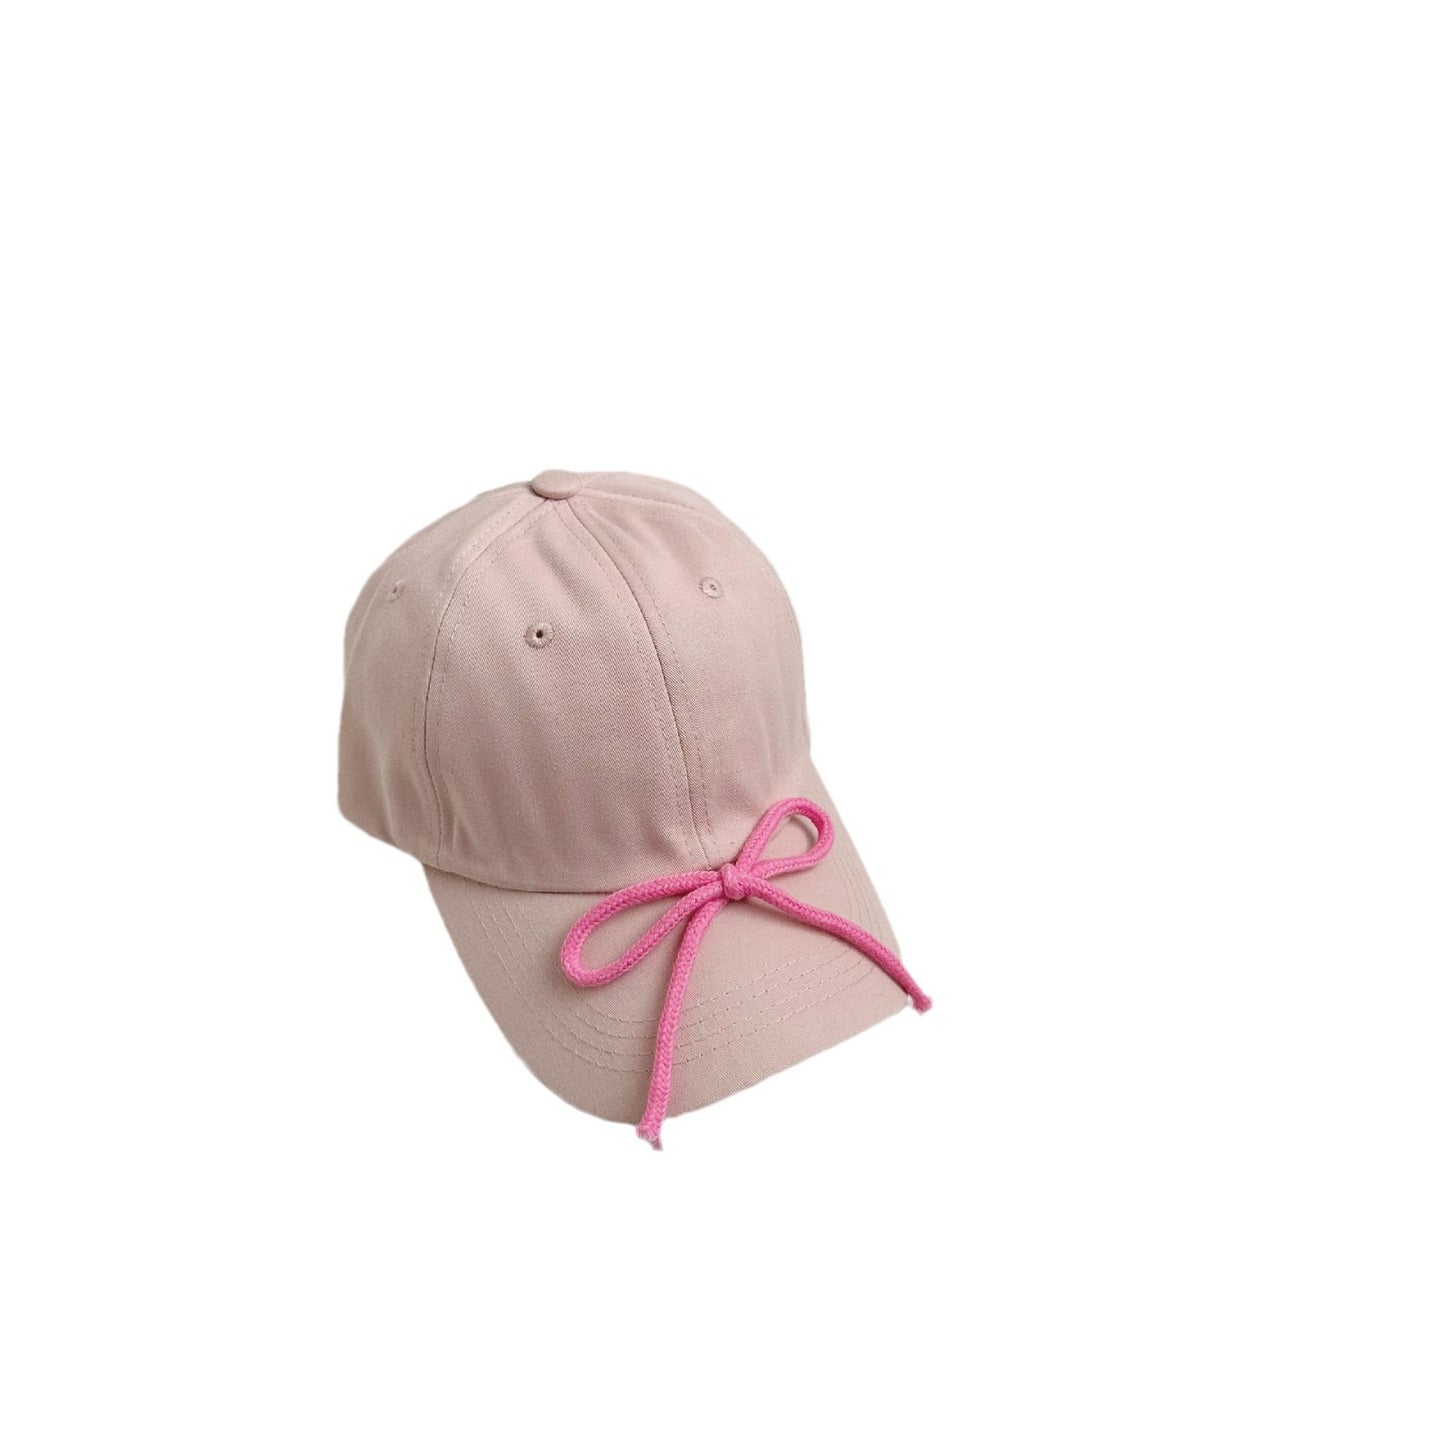 Candy color~Spring and summer trendy children's bow baseball caps for boys and girls, sunshade caps style sun protection hats